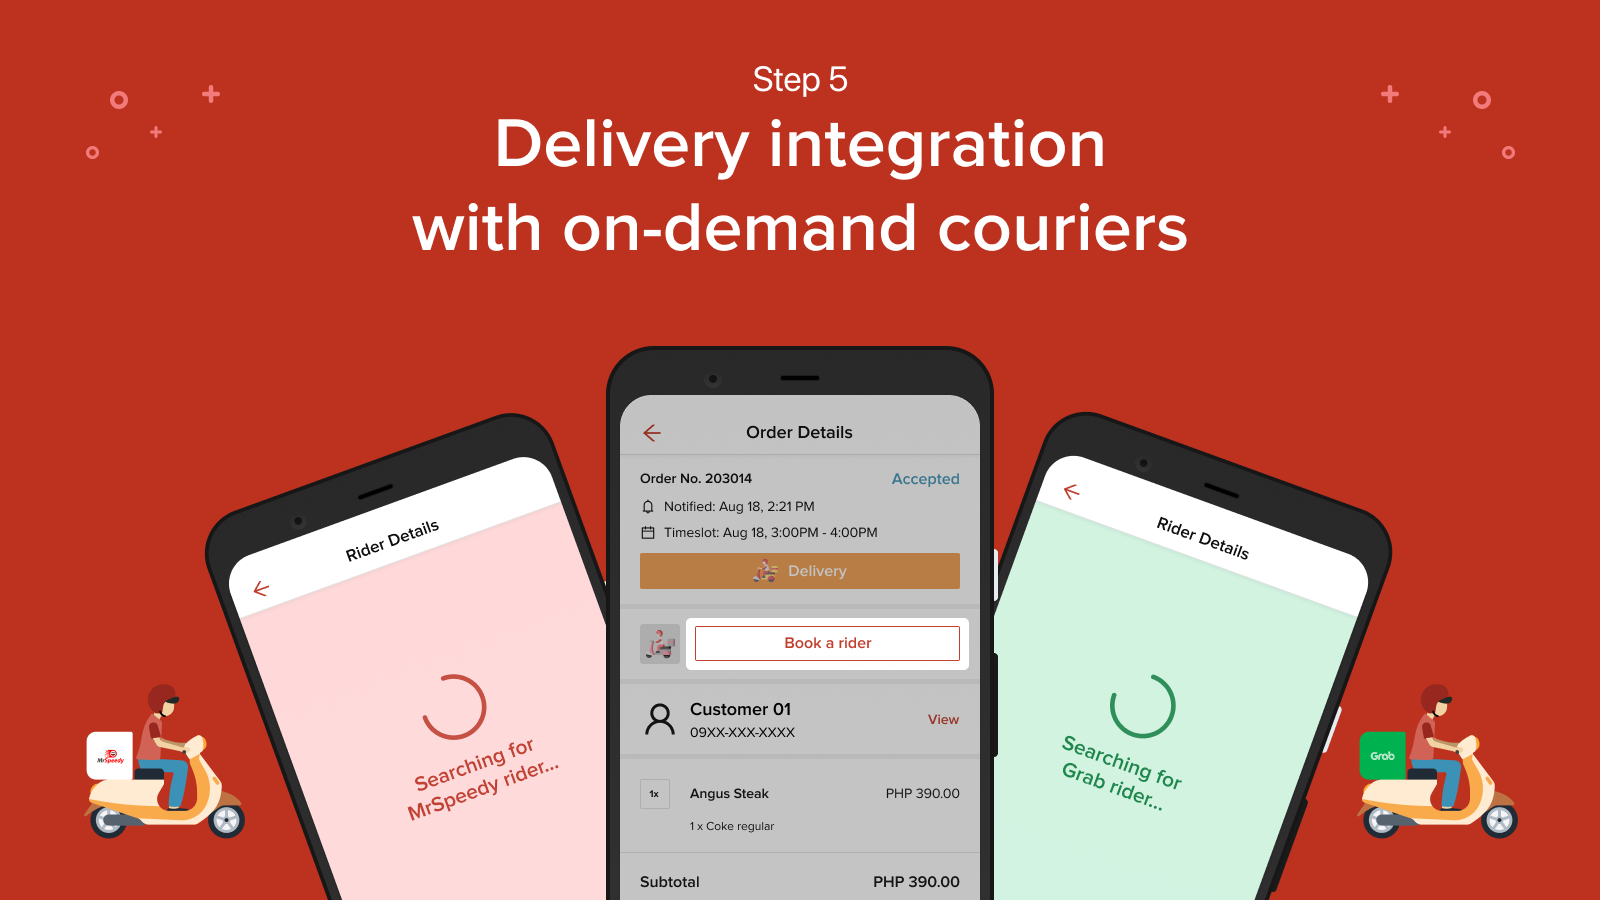 Delivery integration with on-demand couriers